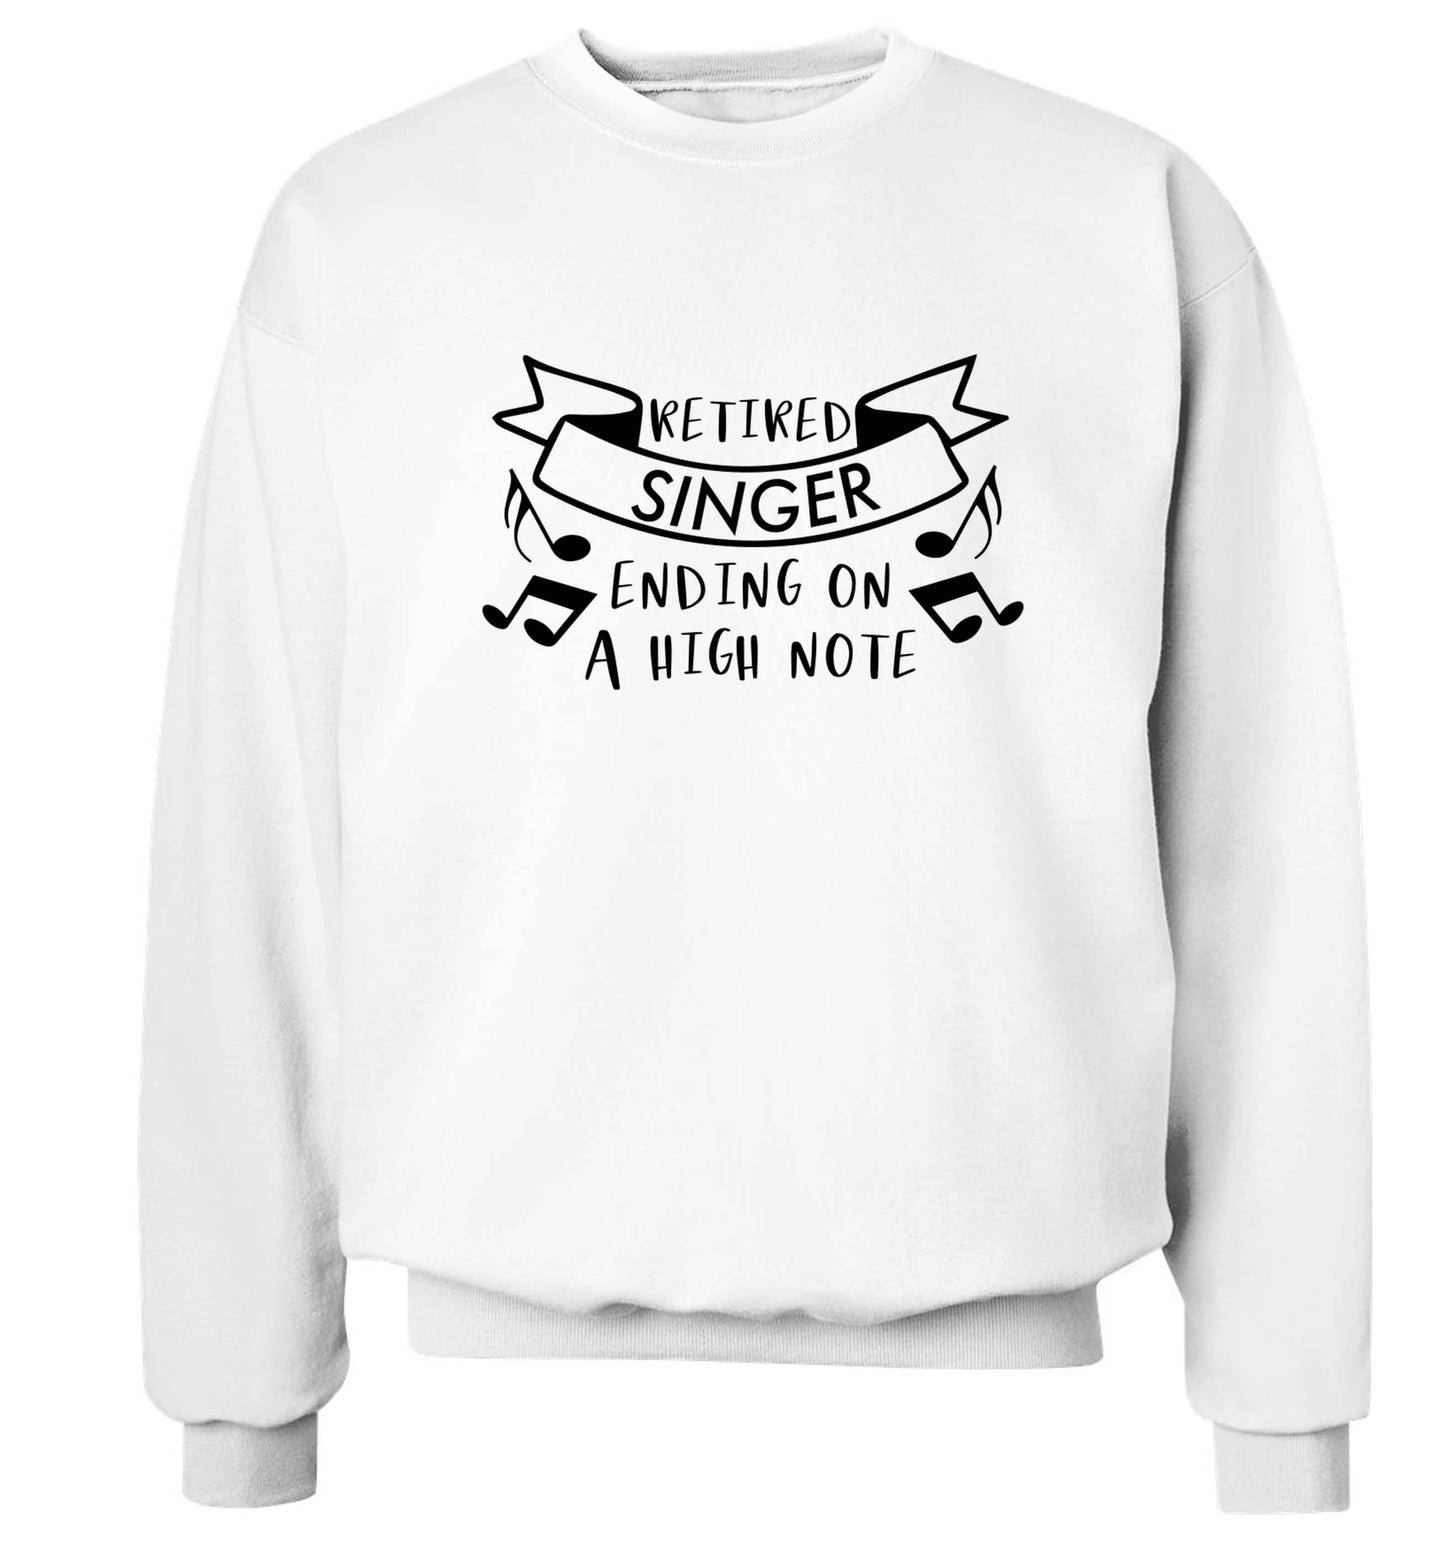 Retired singer ending on a high note Adult's unisex white Sweater 2XL